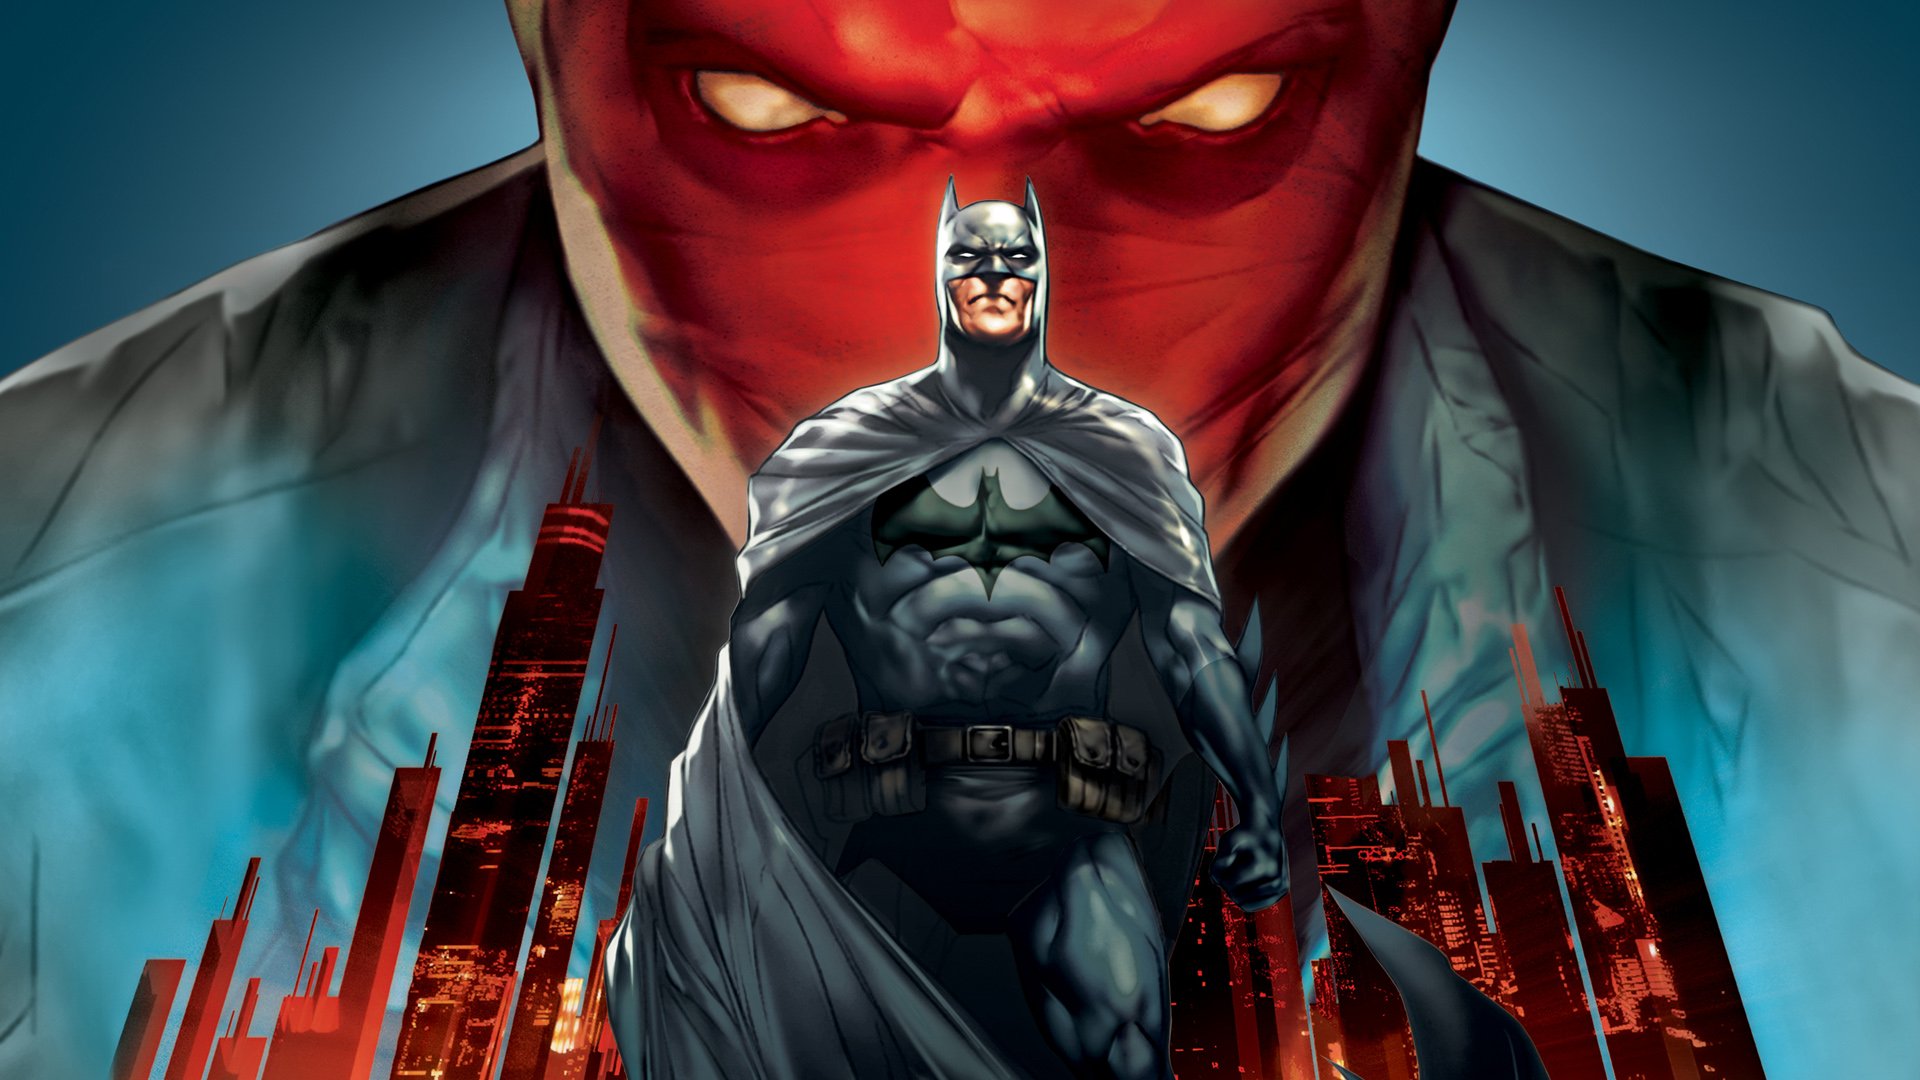 DC Film Rumor: Will Red Hood and Nightwing Be In Ben Affleck's Solo Batman Film?